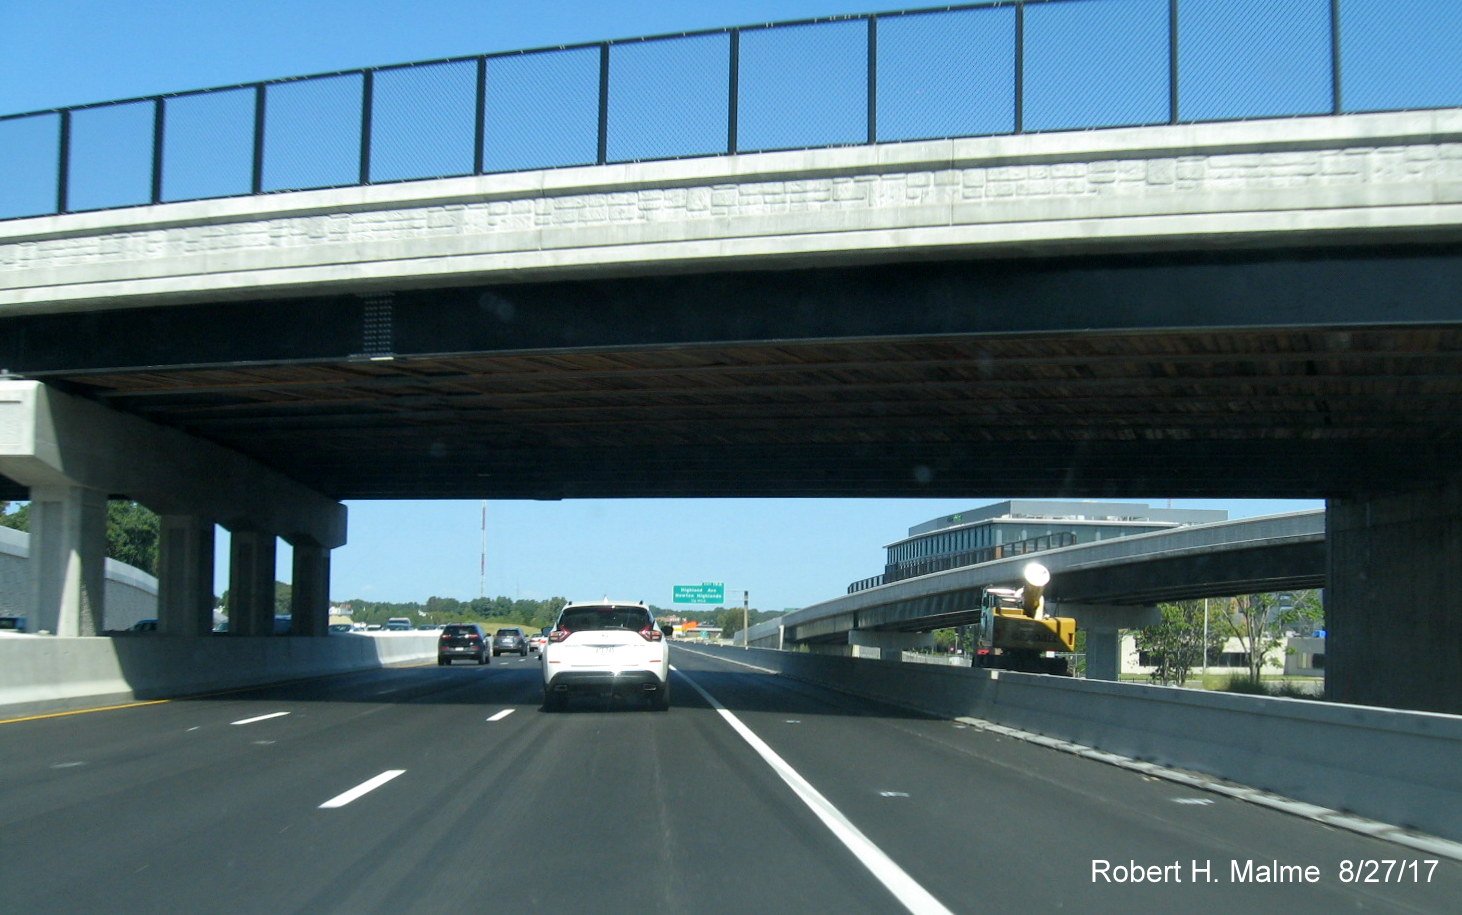 Image of heading underneath the Kendrick St bridge on I-95 North in Add-A-Lane Project work zone in Needham